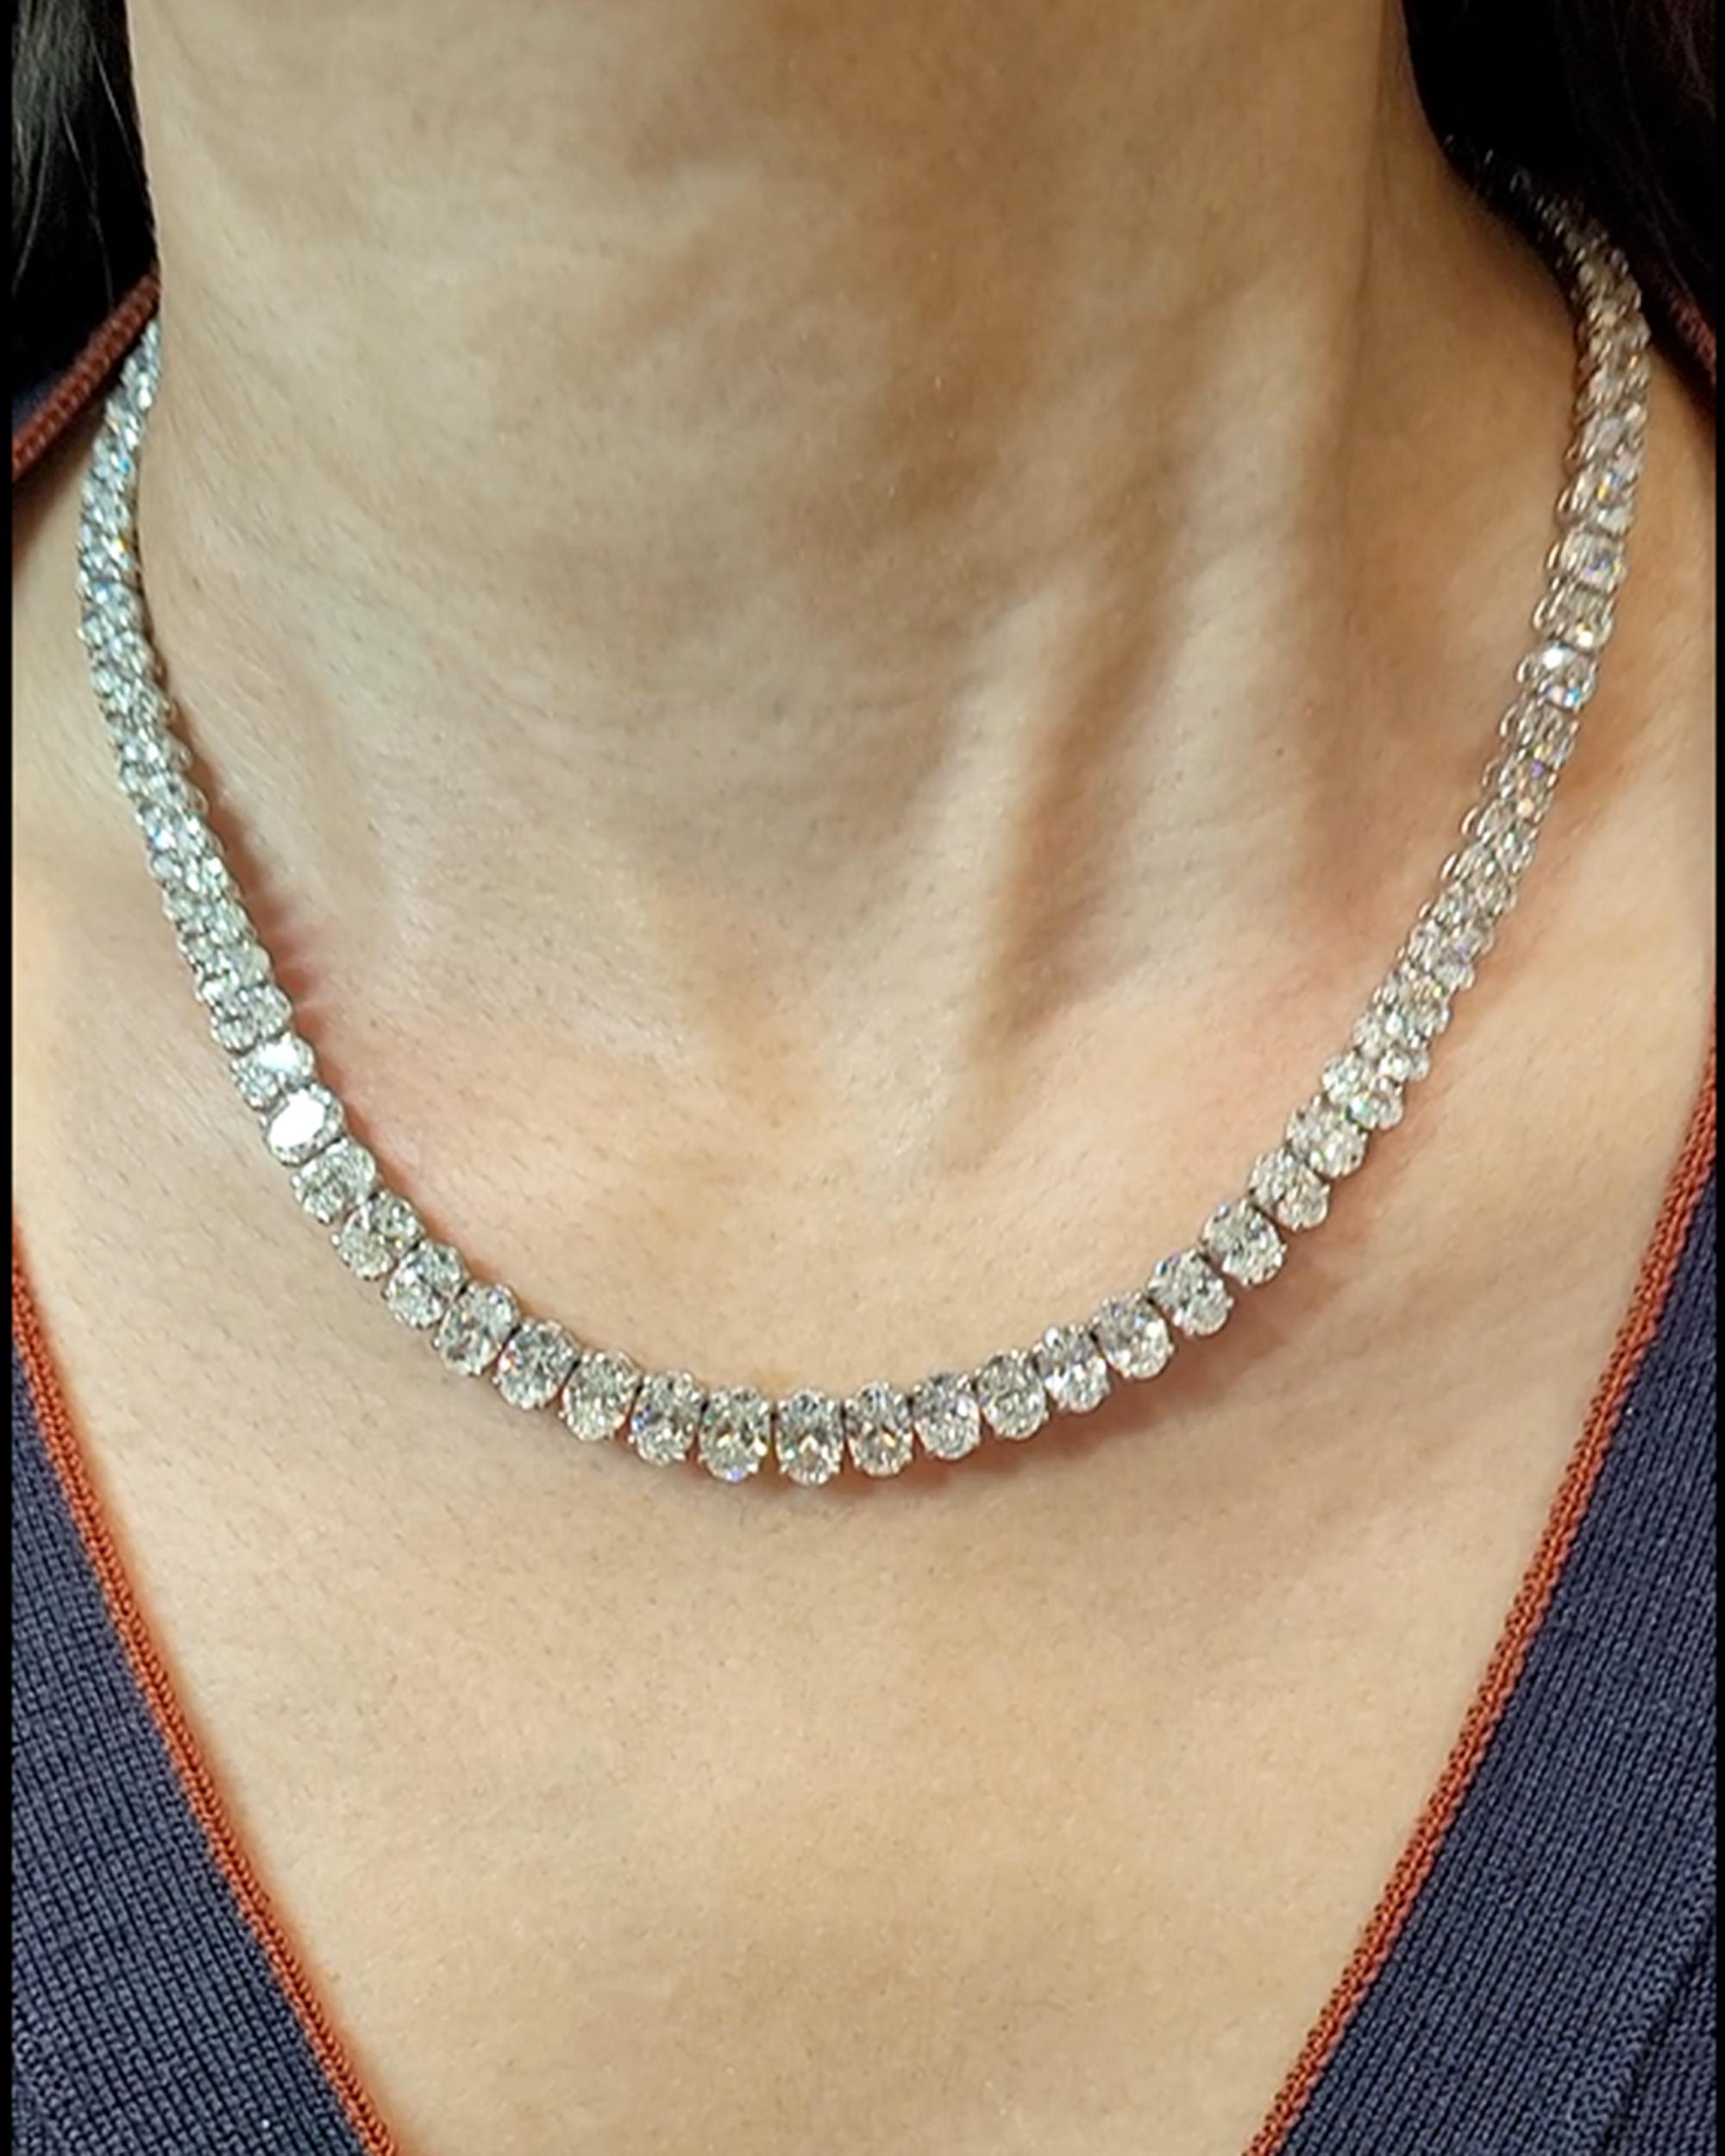 This exquisite Riviera Necklace consists of 92 oval-cut diamonds, with a combined weight of 40.65 carats. Notably, 75 of these diamonds have received GIA certification, affirming their exceptional quality with color grades ranging from D to G and